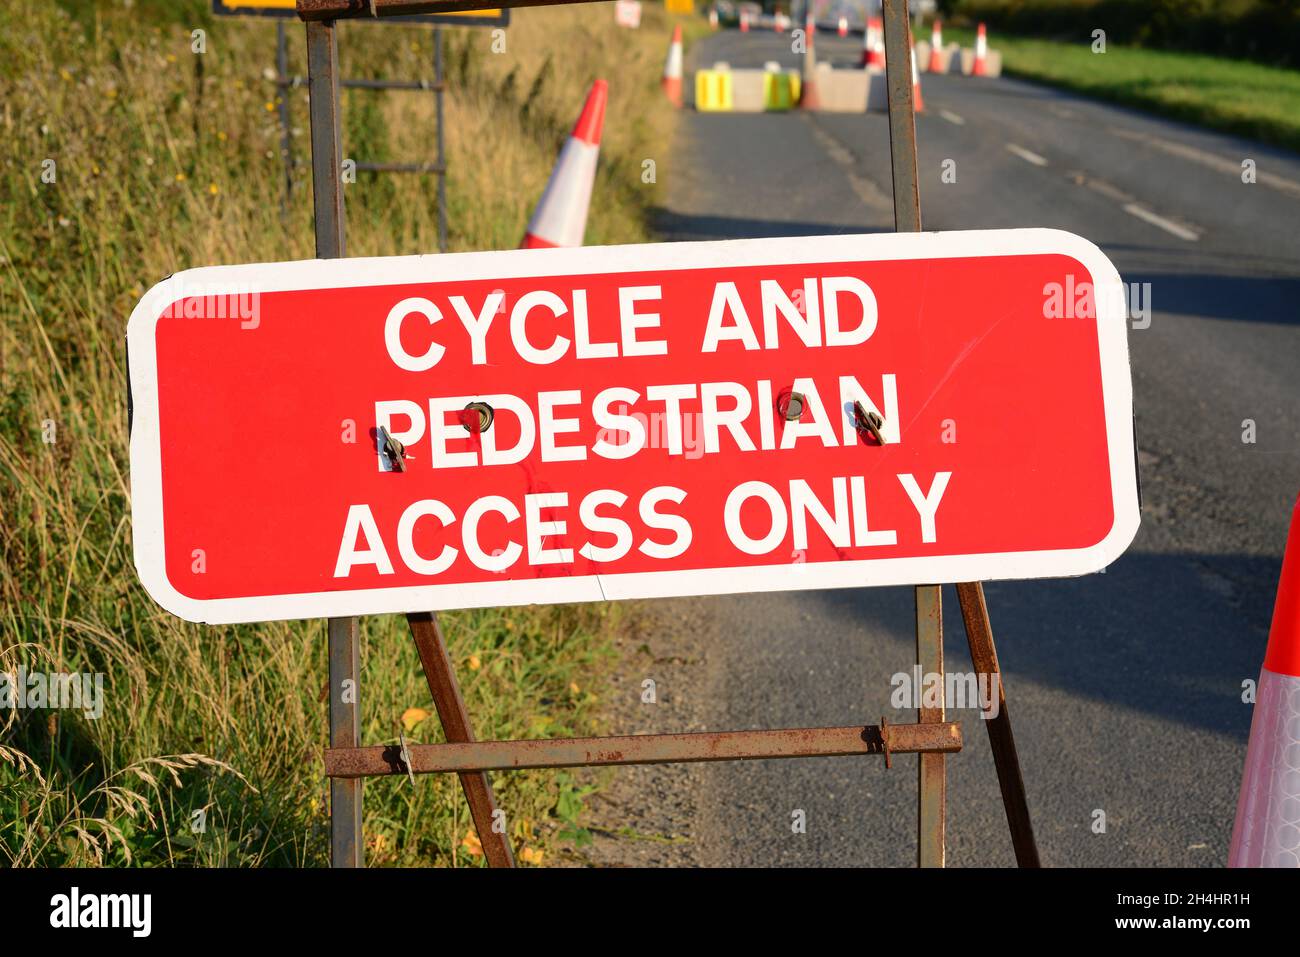 cycle and pedestrian access only on road ahead york united kingdom Stock Photo